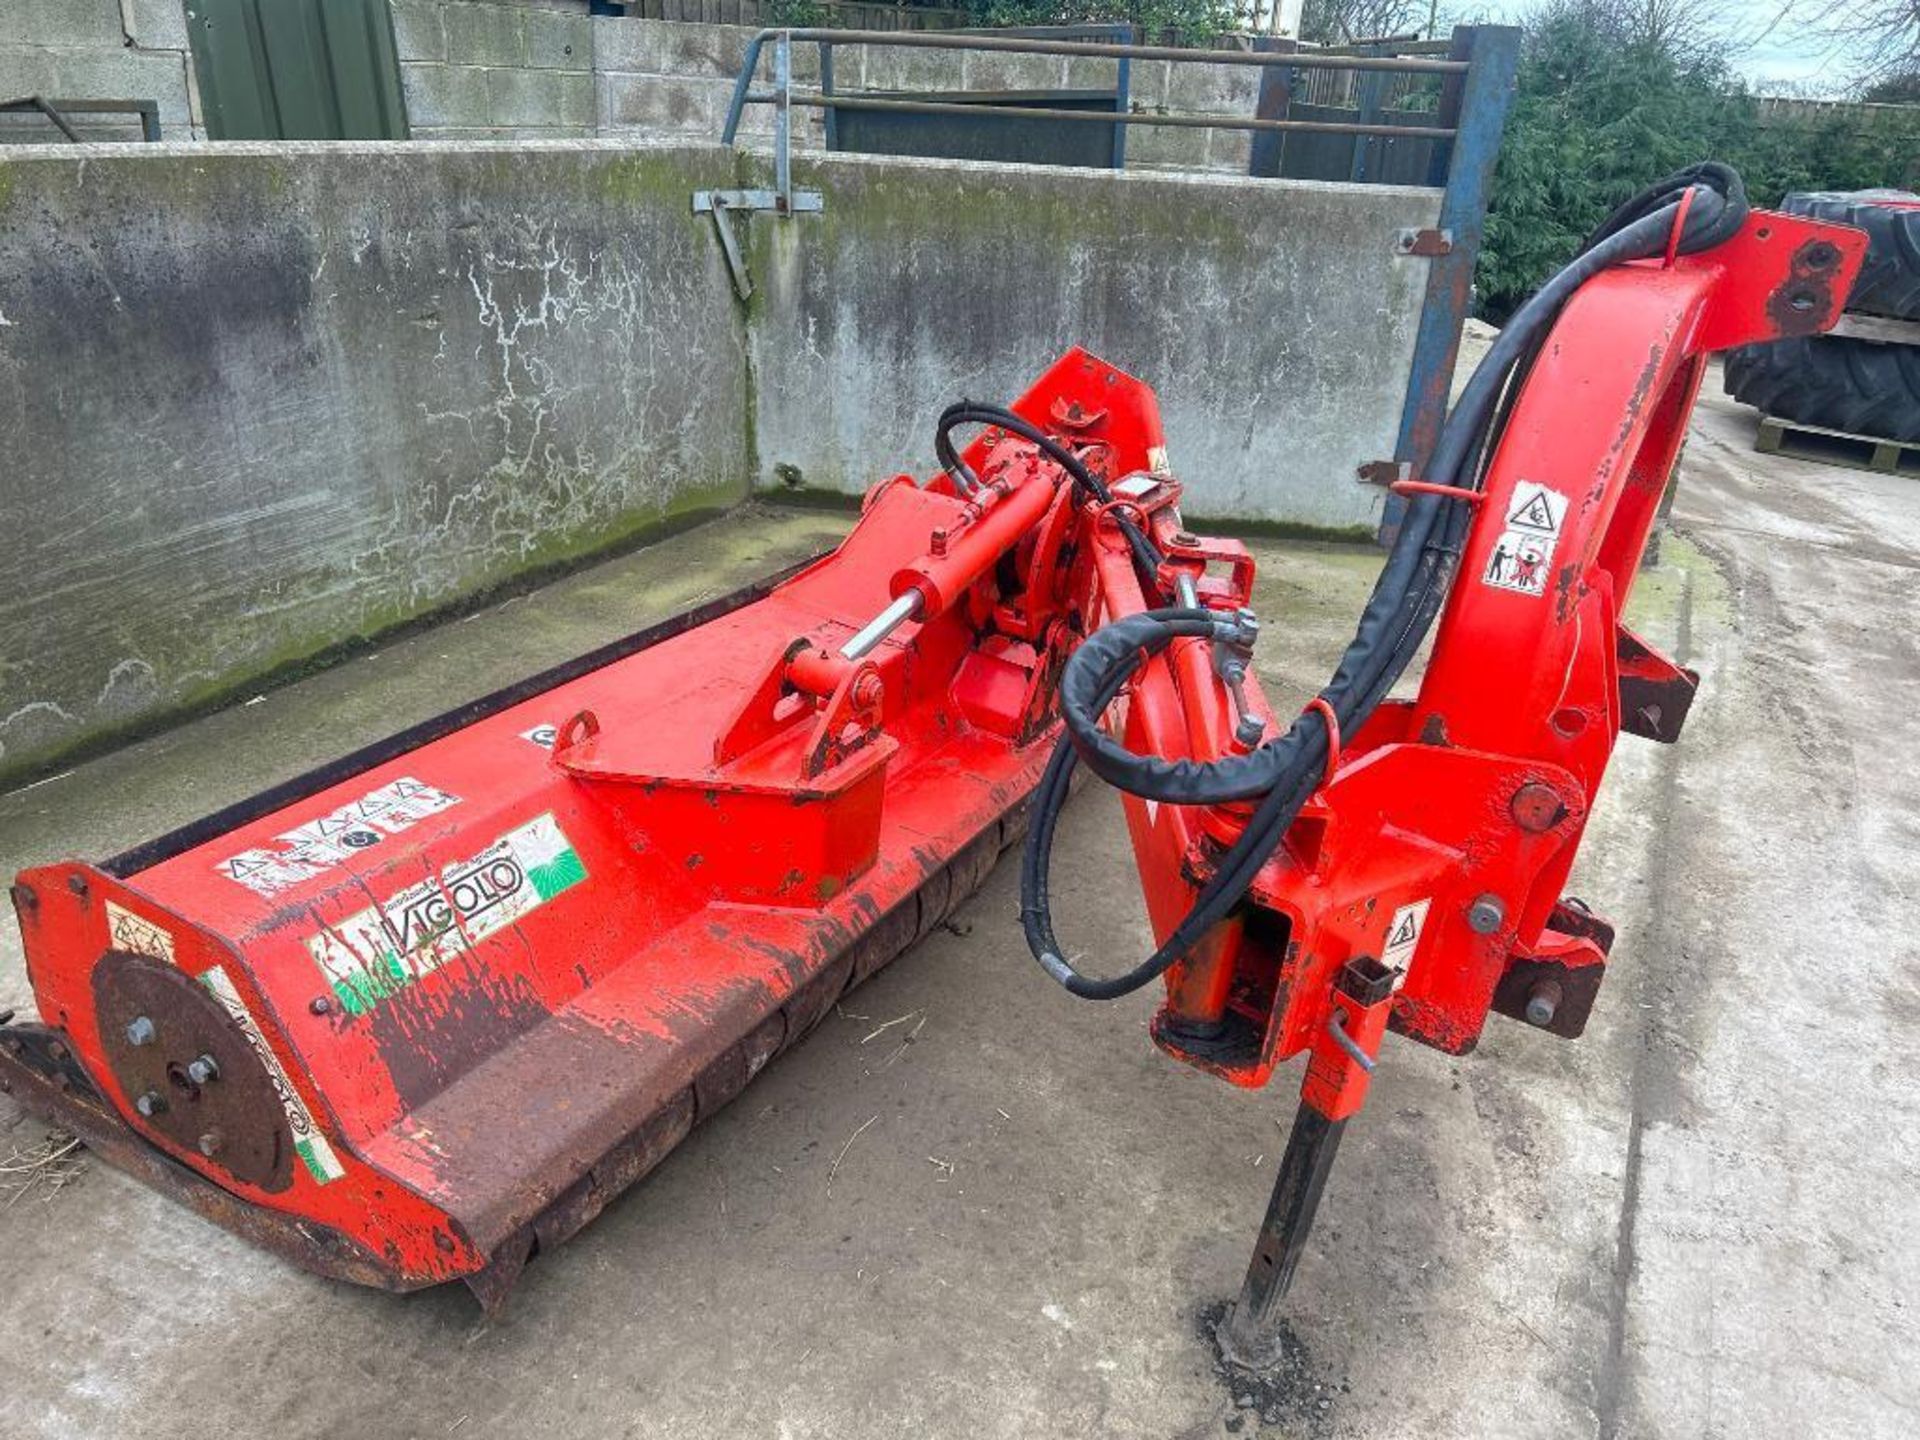 2010 Vigalo 2m flail mower (for spares or repairs) - Image 2 of 5